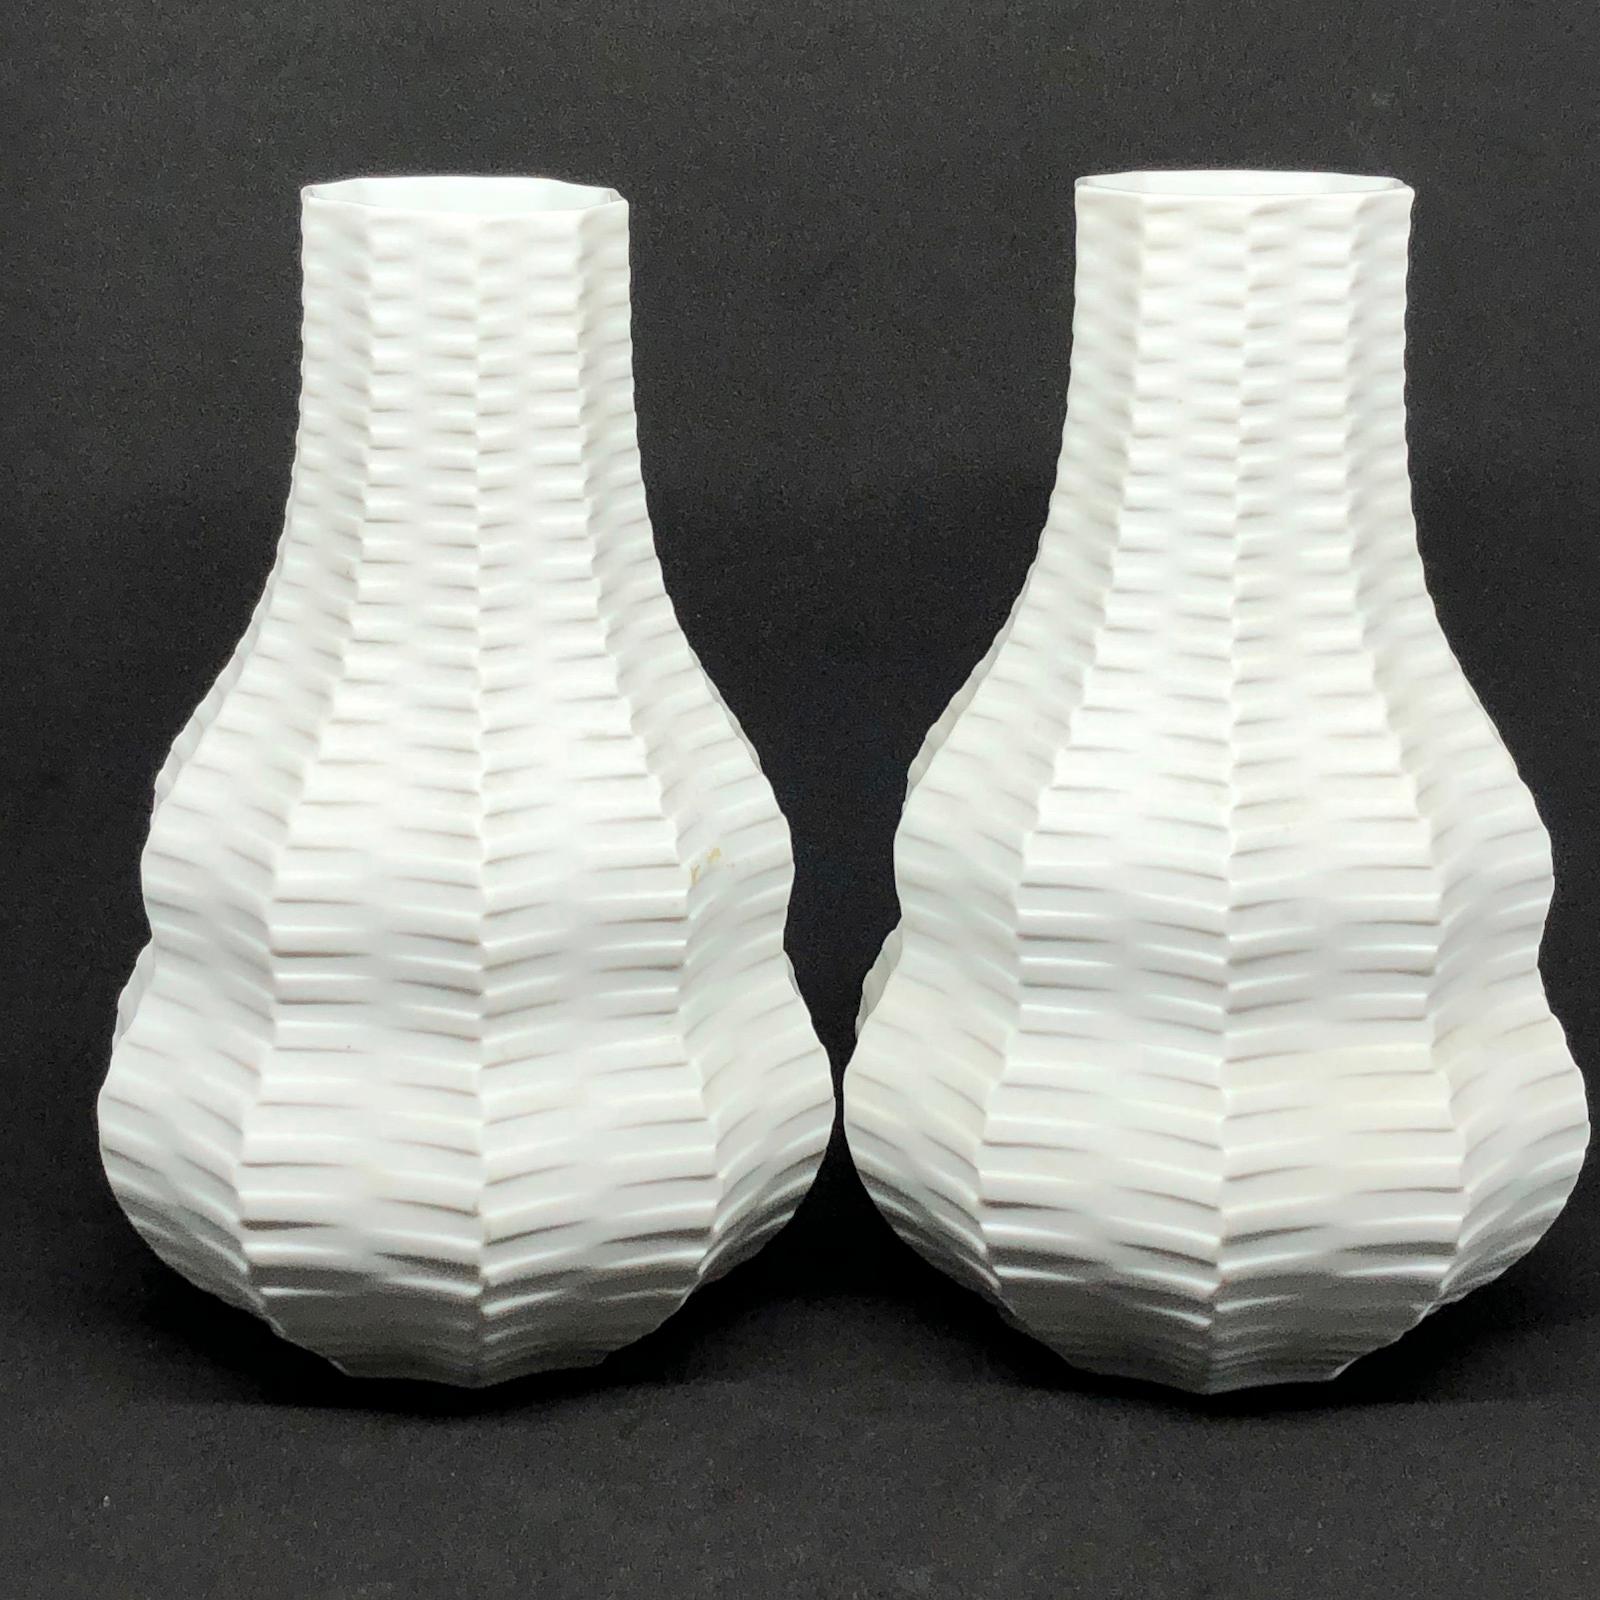 An amazing set of two bisque porcelain midcentury studio art pottery vase made in Germany, by Heinrich Fuchs for Hutschenreuther, circa 1960s. Vases are in very good condition with no chips, cracks, or flea bites. Signed with Manufactory mark and